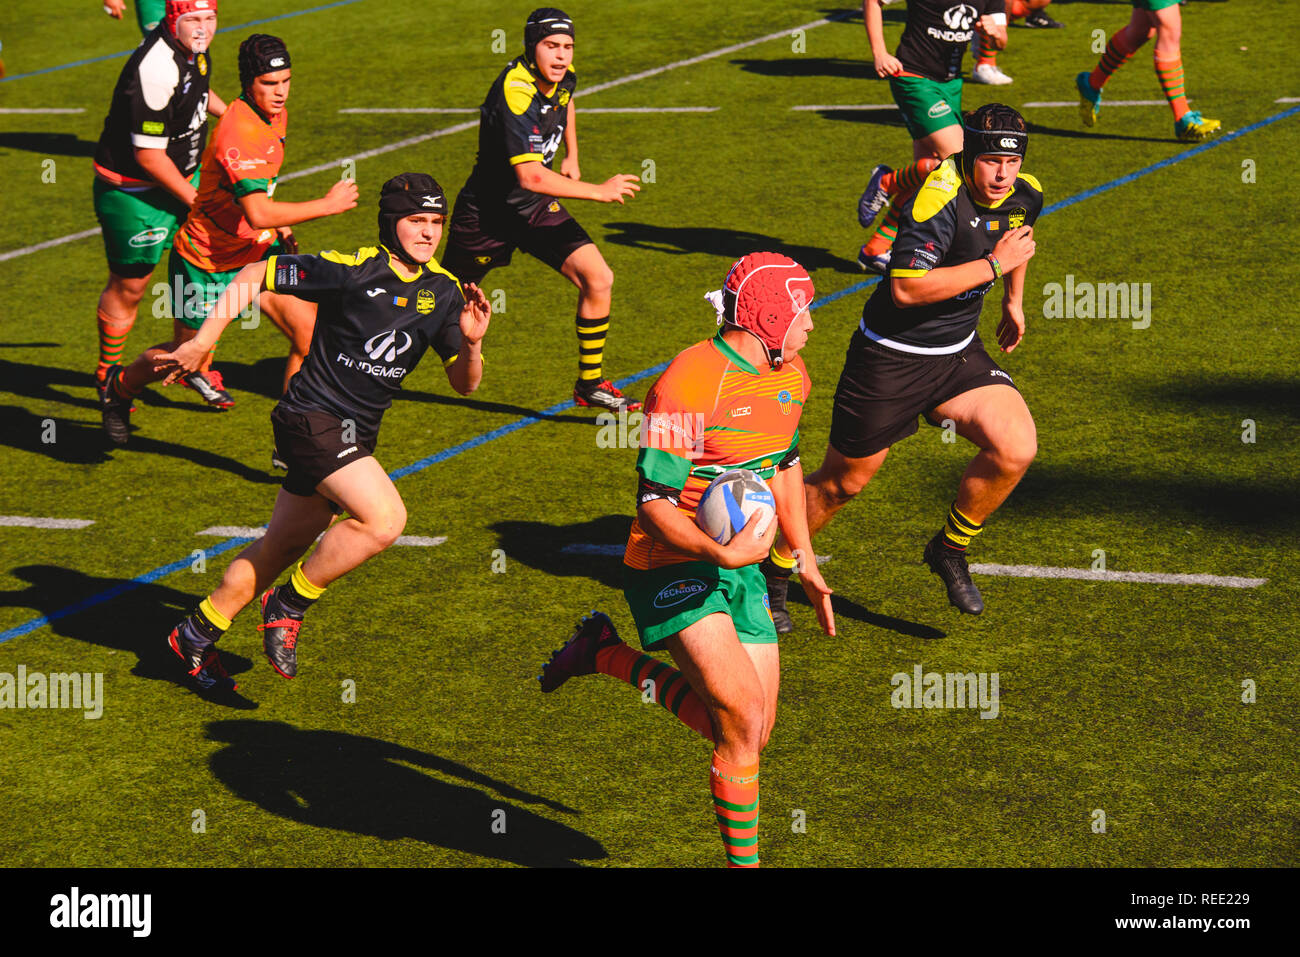 Valencia, Spain - January 19, 2019: Fight for the ball between players during an amateur rugby match. Stock Photo